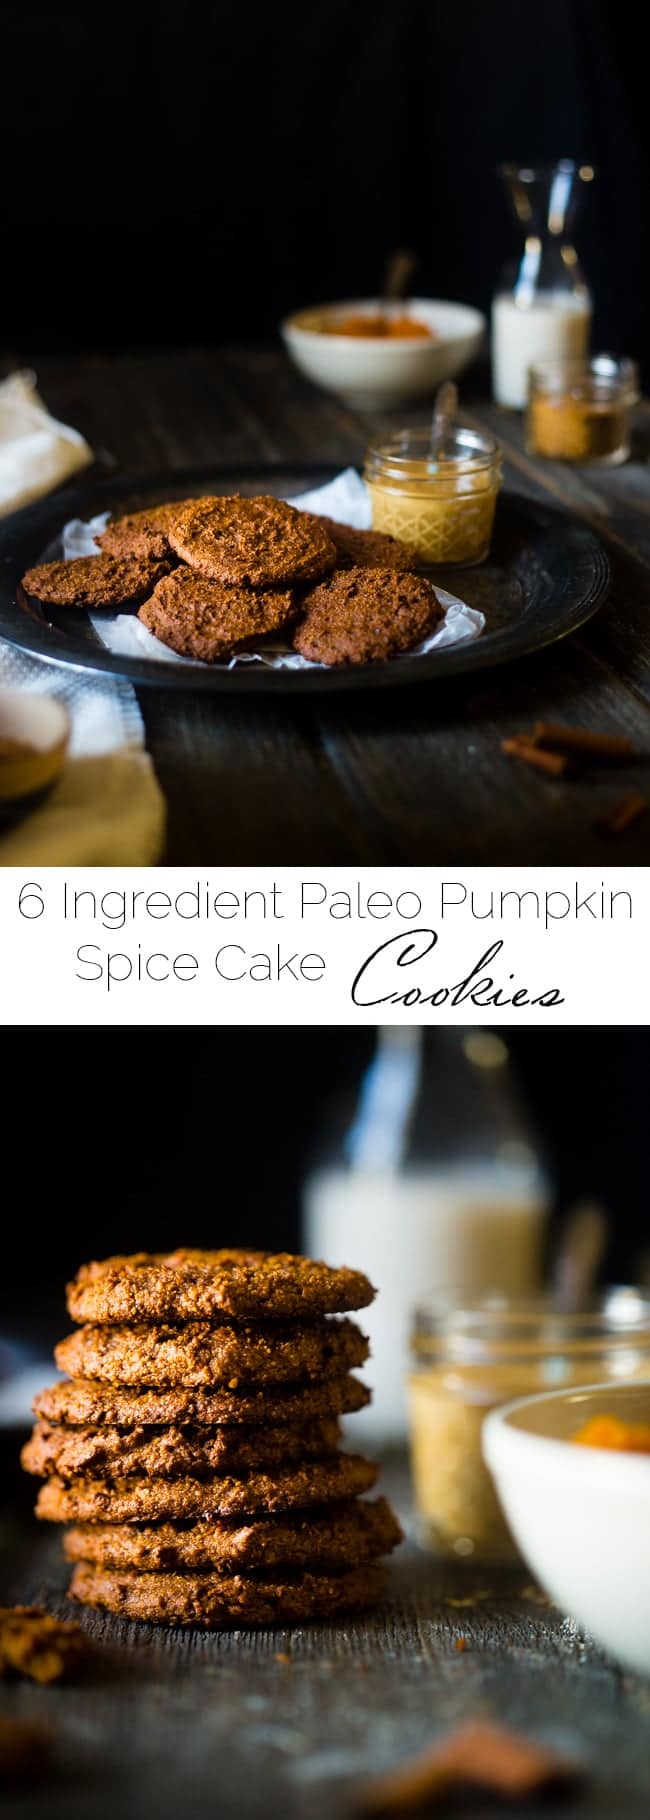 6 Ingredient Pumpkin Paleo Cookies - Soft, cakey and only 70 calories! They're made in one bowl, are butter and oil free, and are the perfect healthy cookies for fall! | Foodfaithfitness.com | @FoodFaithFit